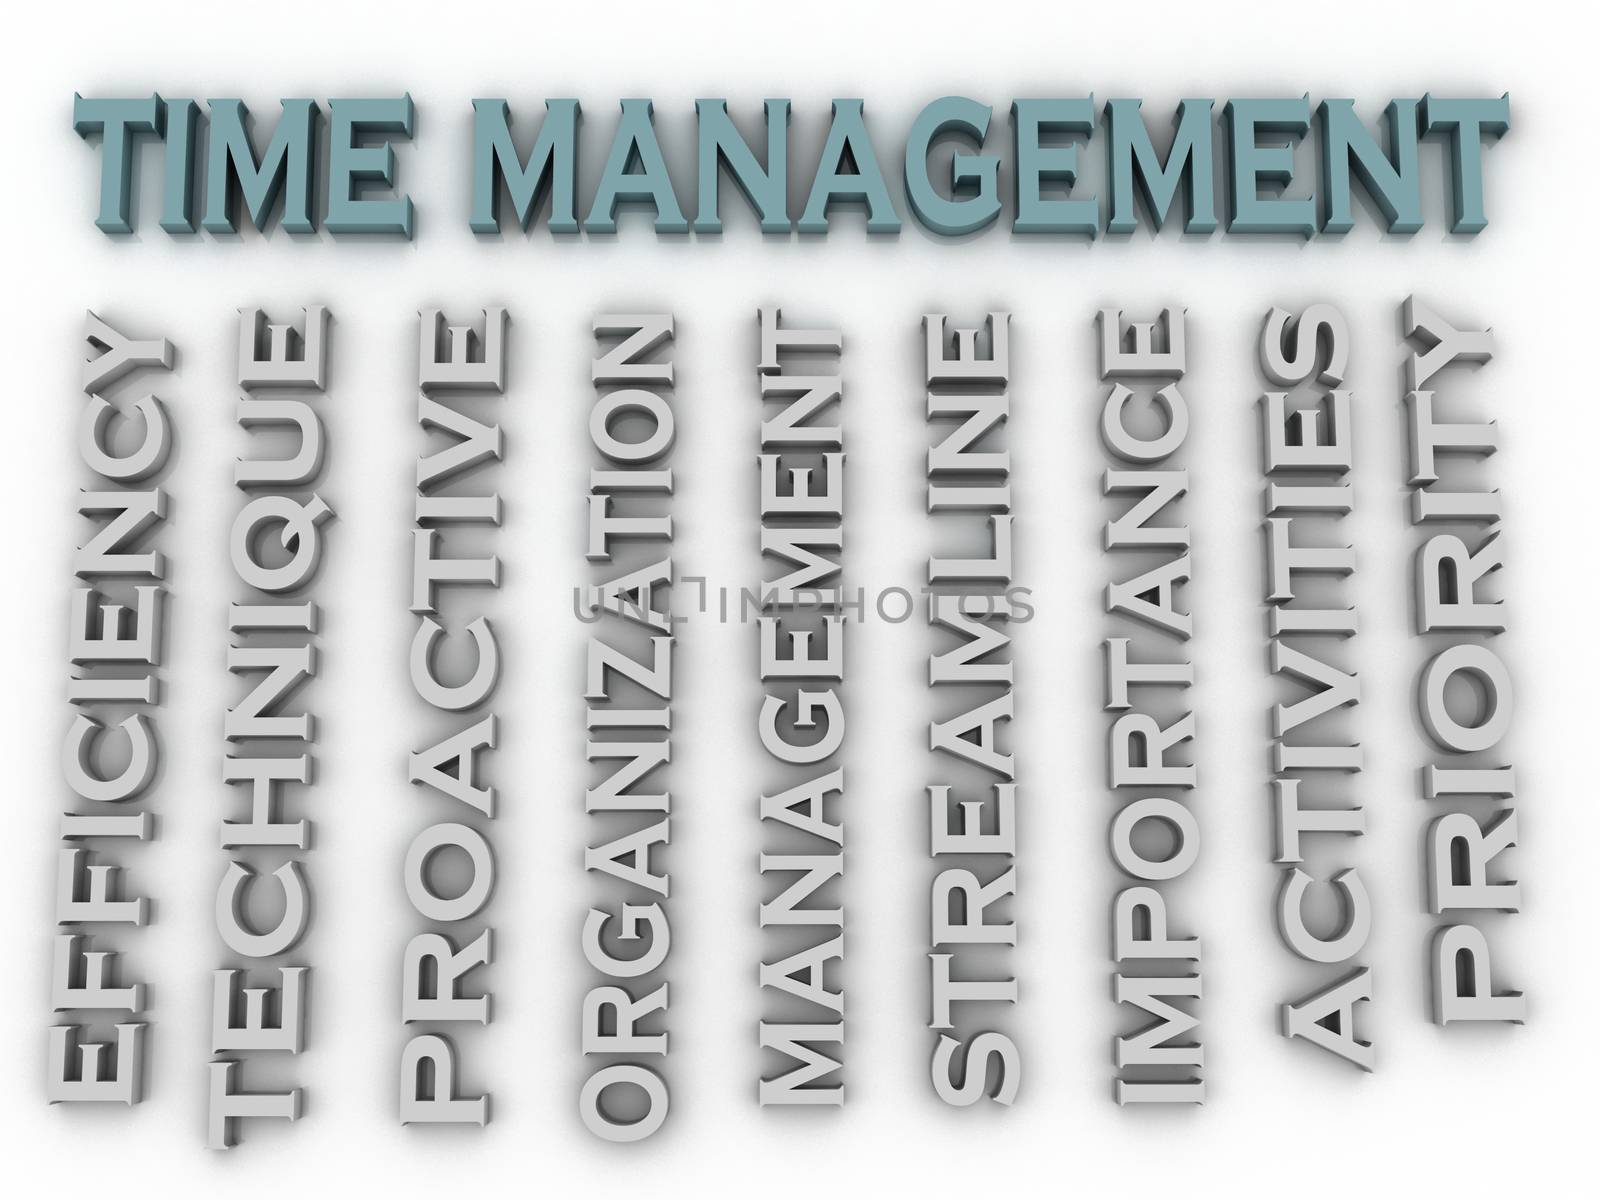 3d image Time management issues concept word cloud background by dacasdo